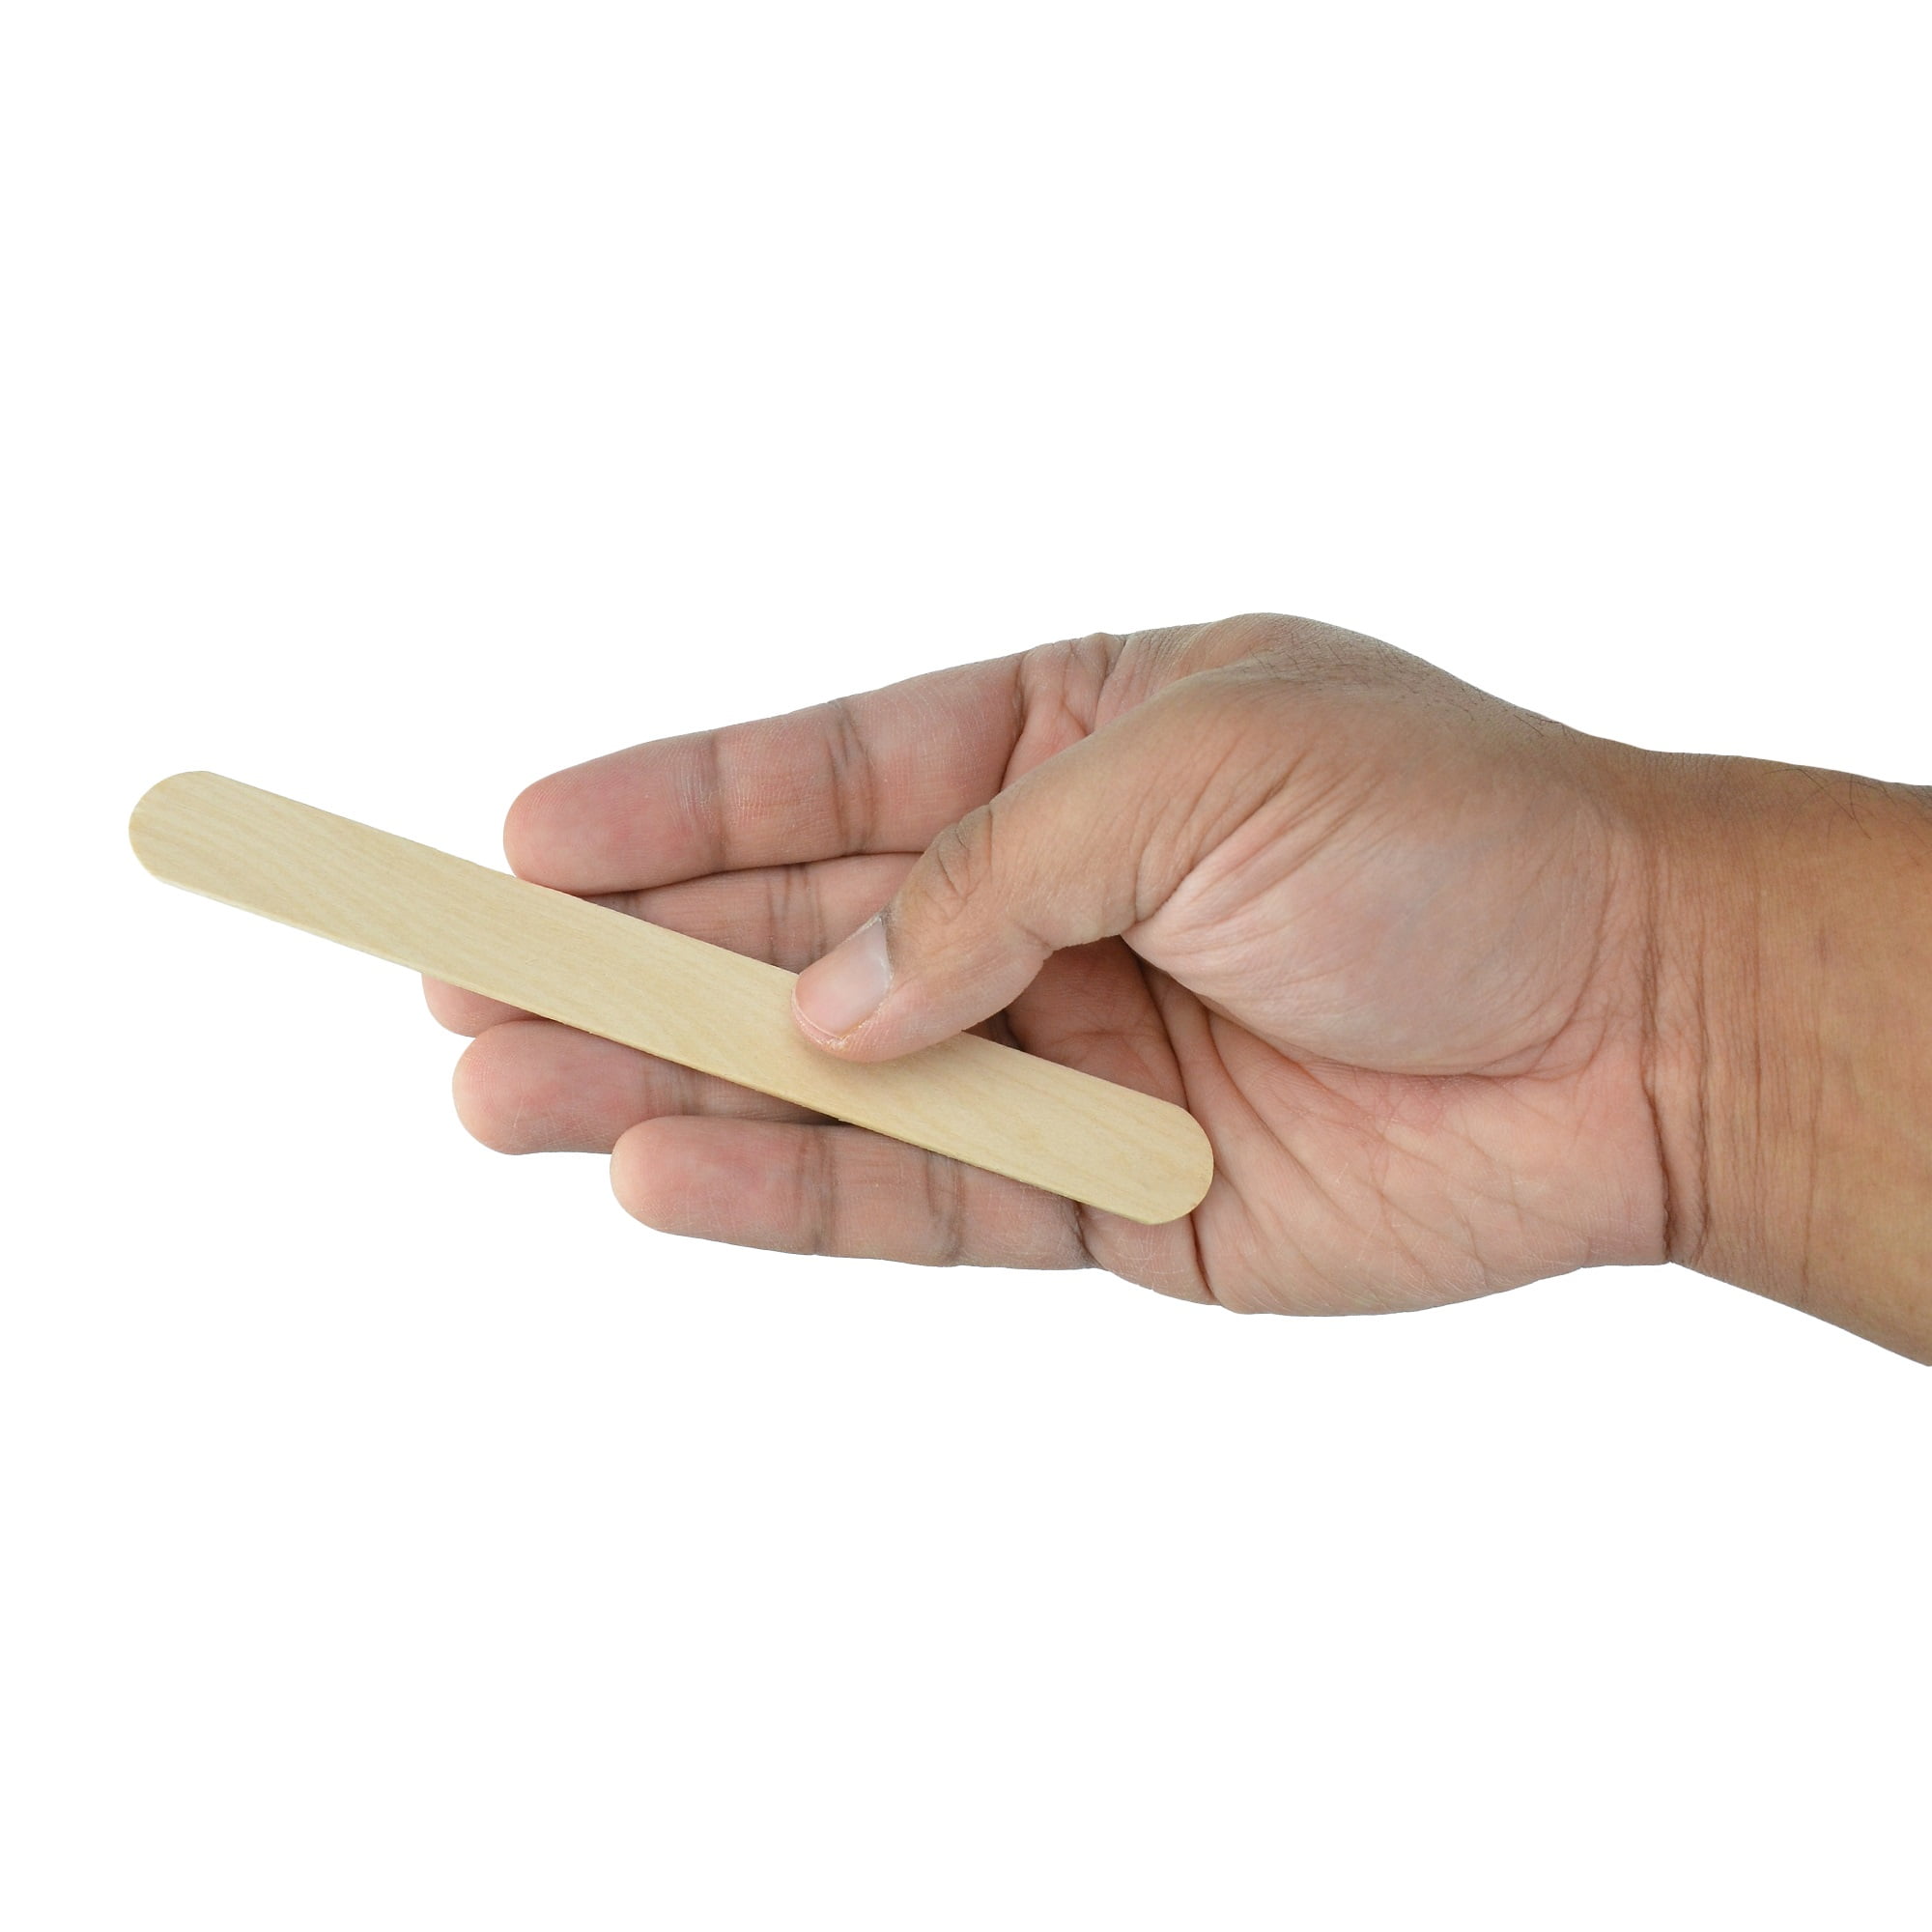 Sterile Tongue Depressors [Pack of200] Senior 6 Inch – Each Wooden  Depressor Stick Individually Wrapped [2 boxes of 100] also used as Wax  Applicator